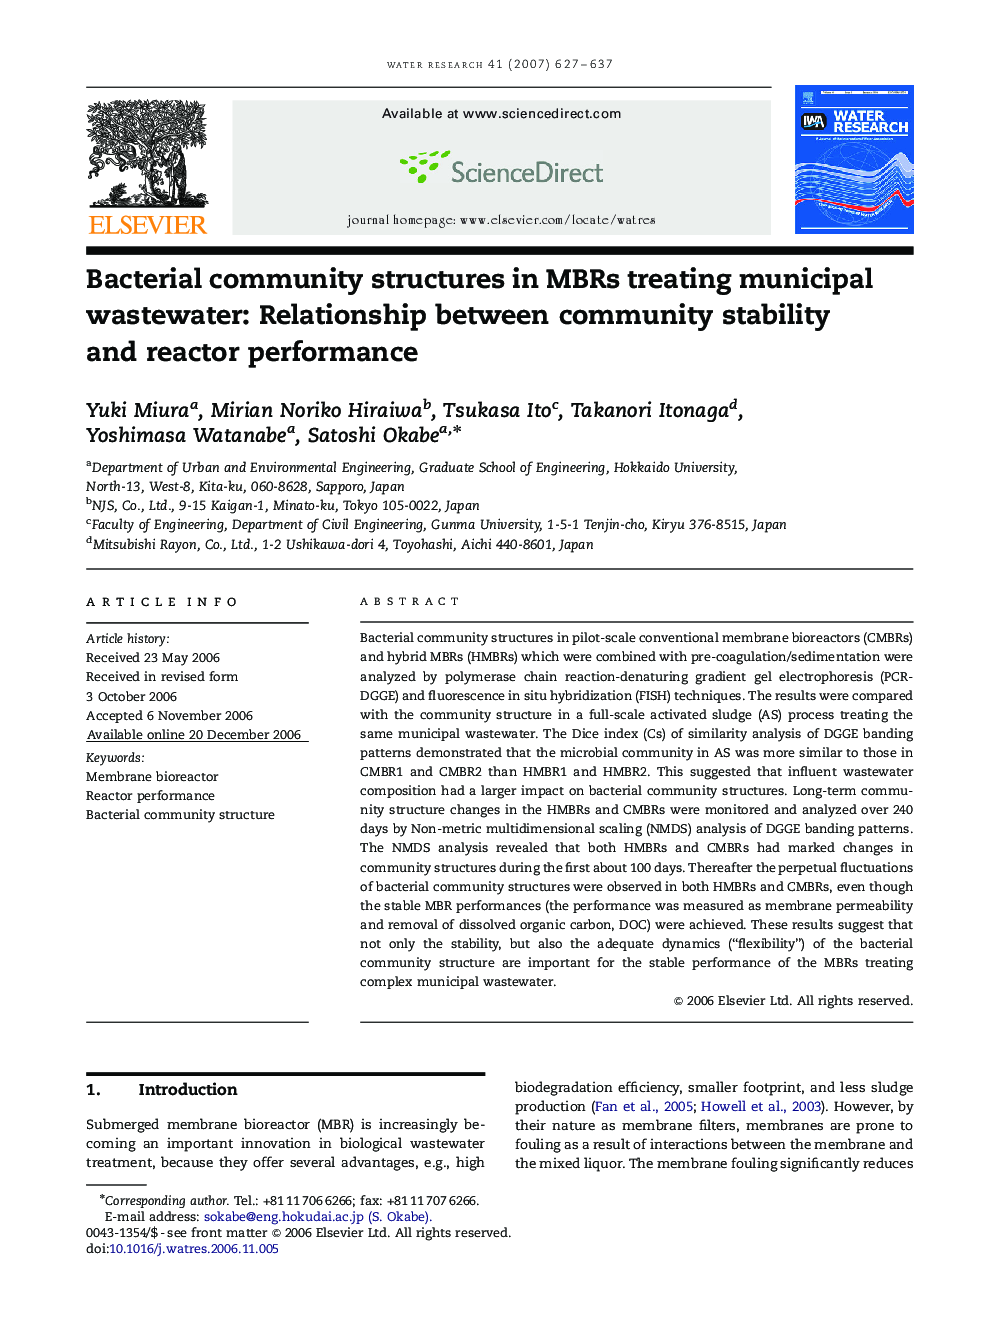 Bacterial community structures in MBRs treating municipal wastewater: Relationship between community stability and reactor performance